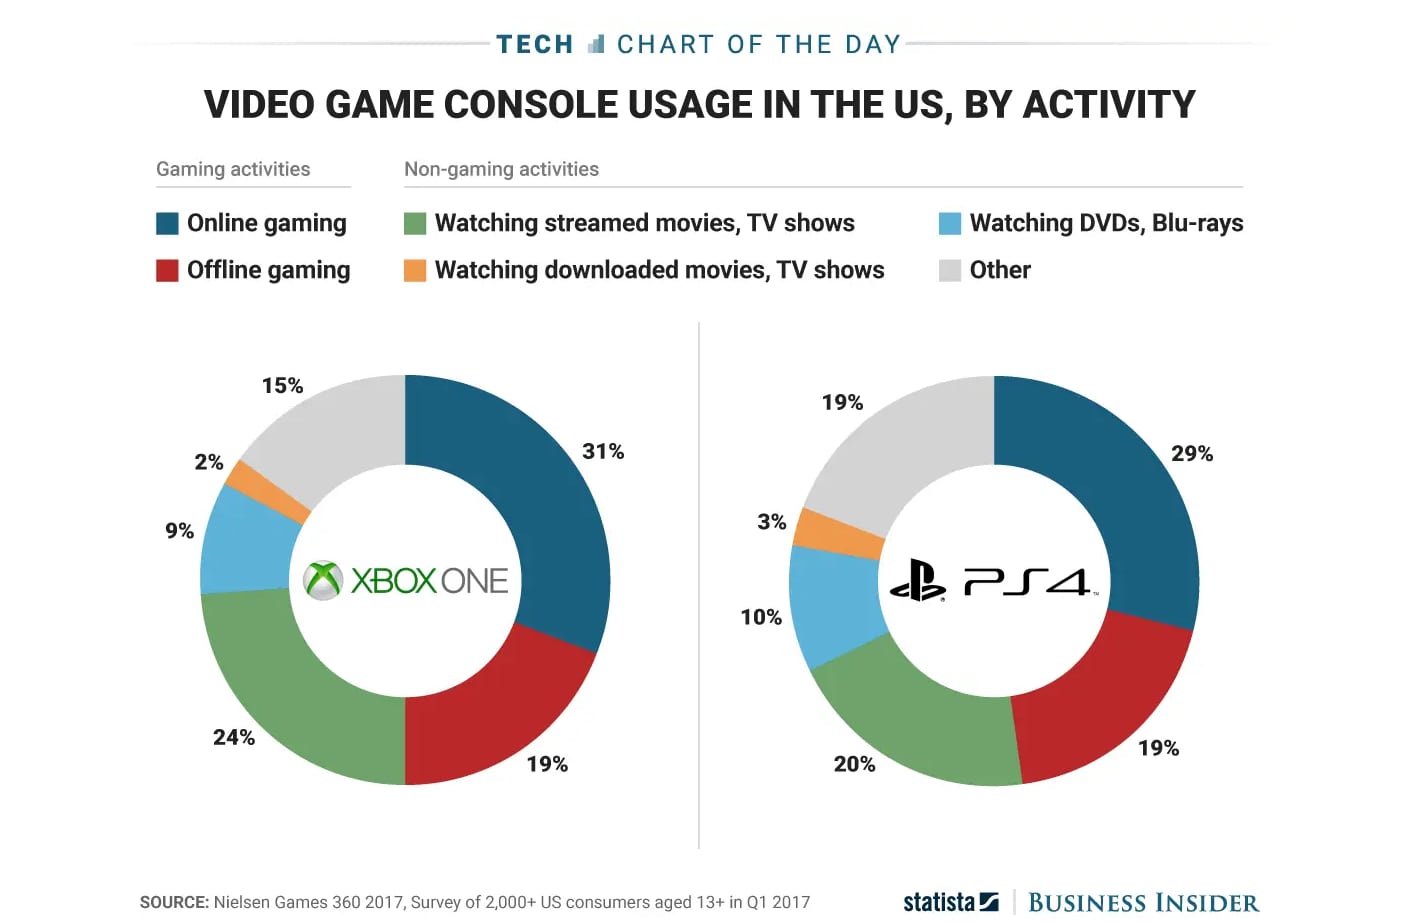 Game console usage